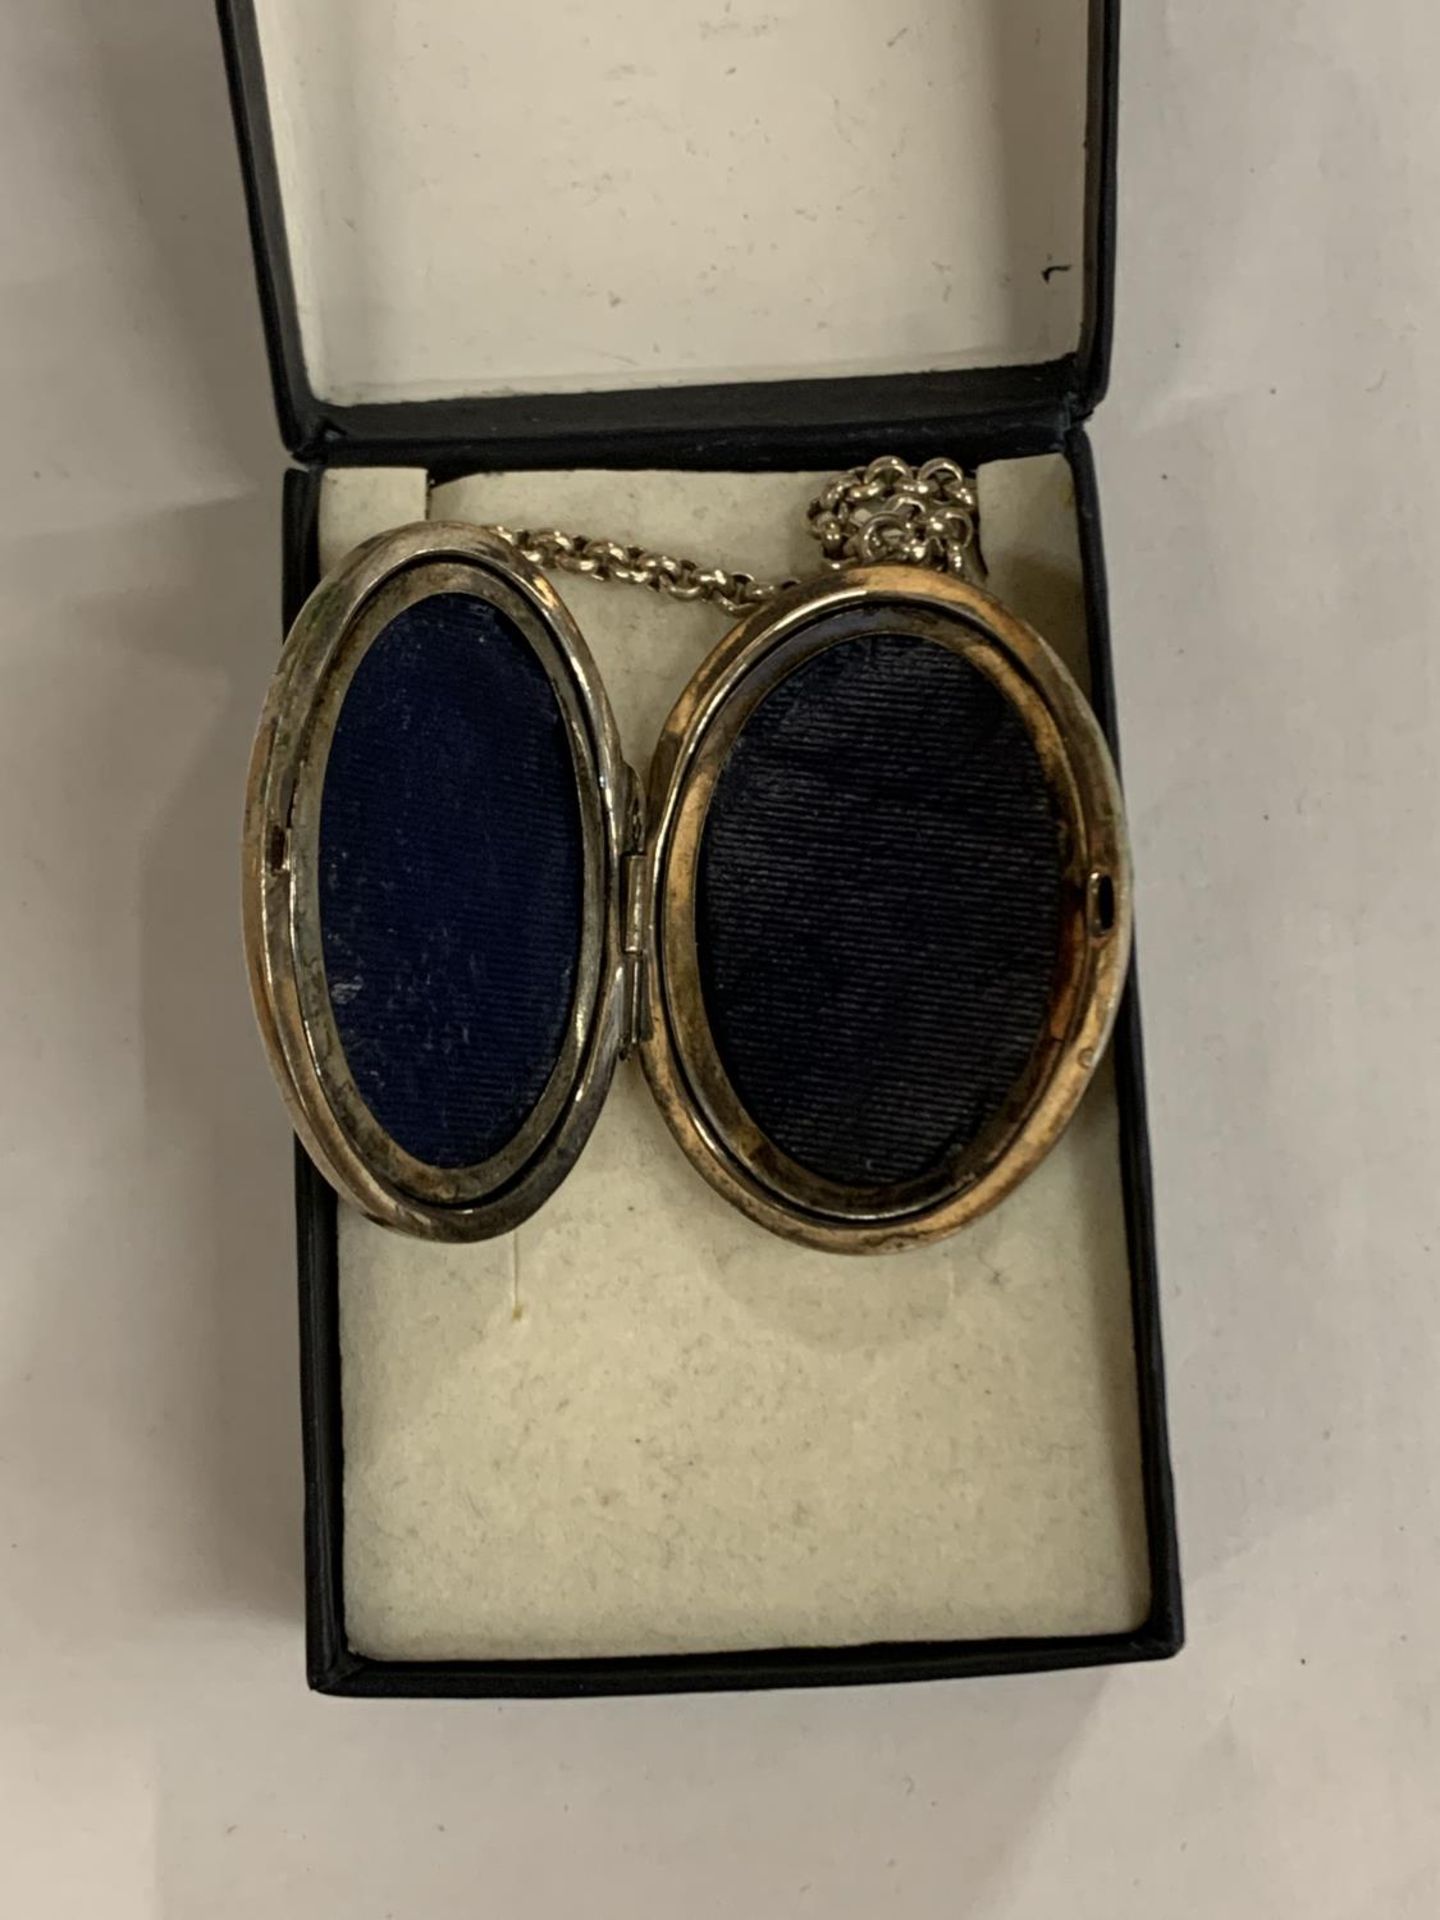 A SILVER OVAL LOCKET IN A PRESENTATION BOX - Image 3 of 4